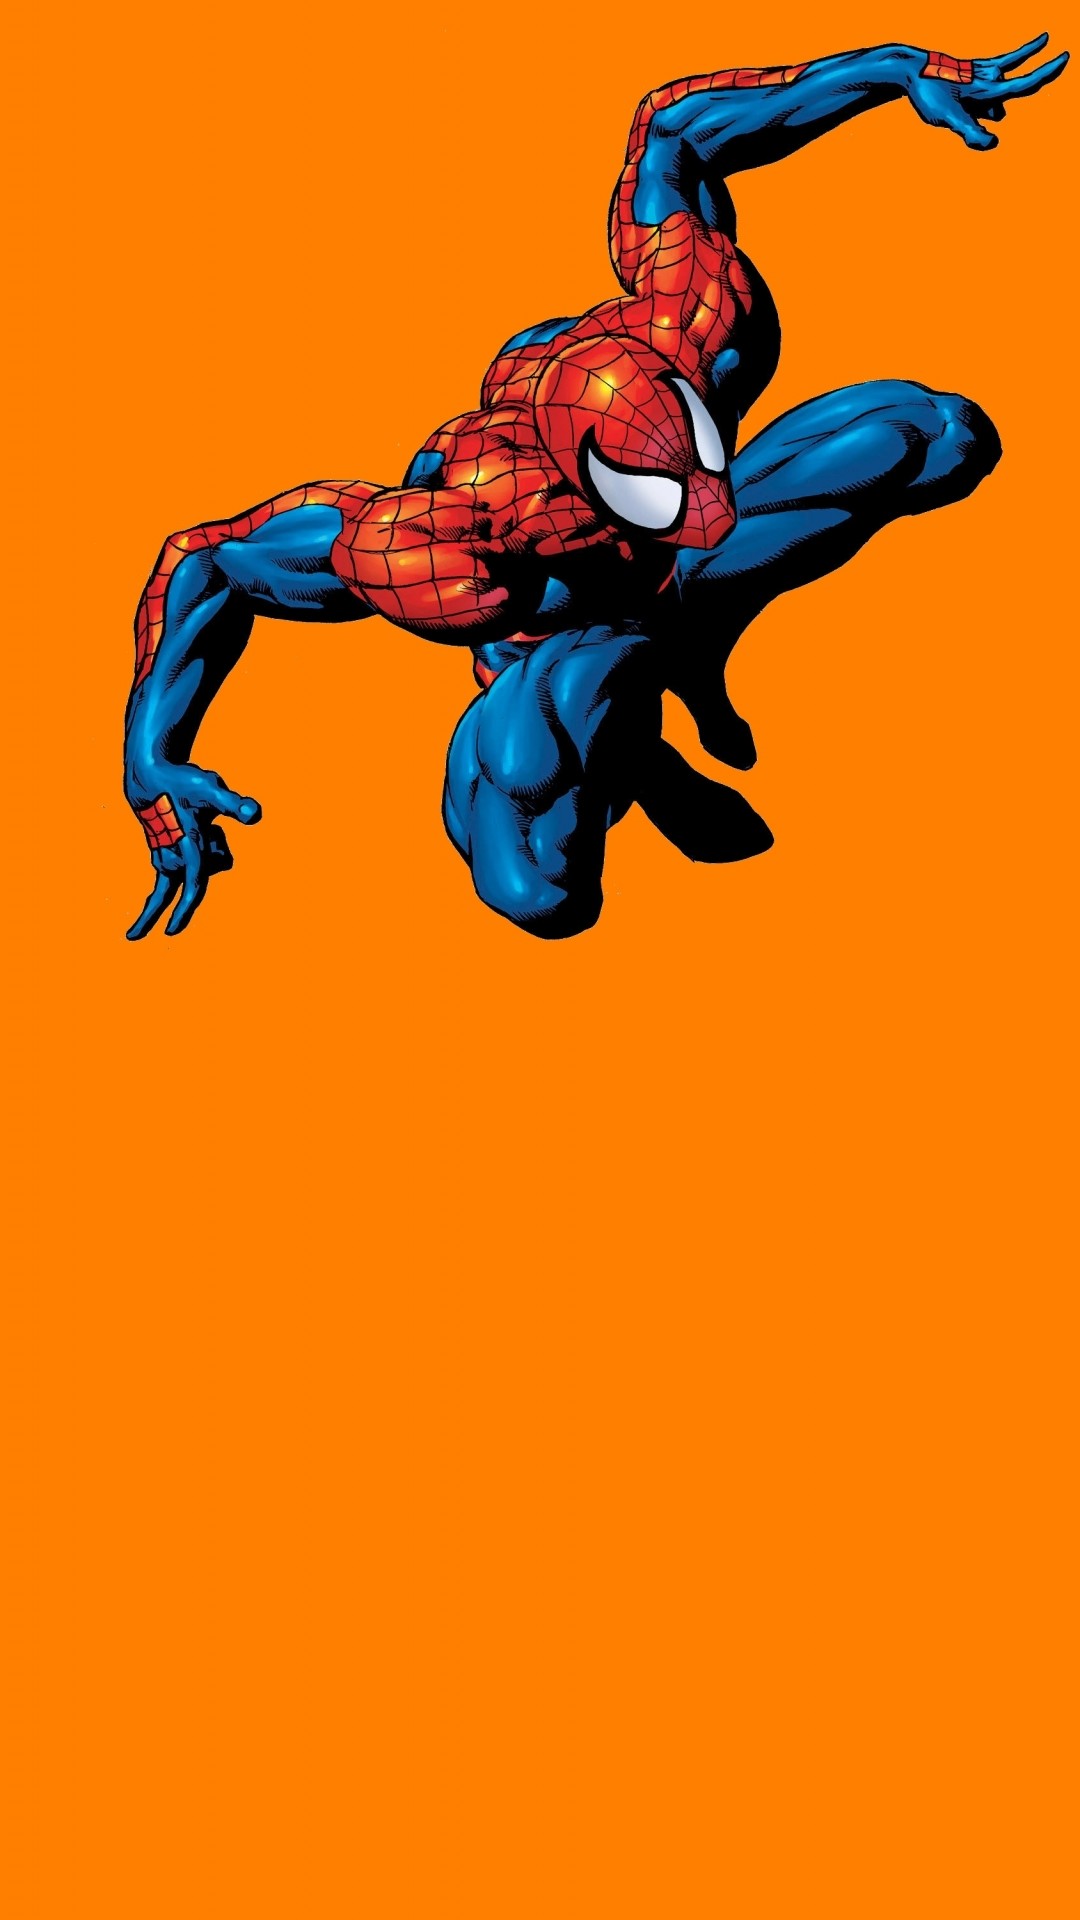 1080x1920 Spiderman Background HD for Iphone.